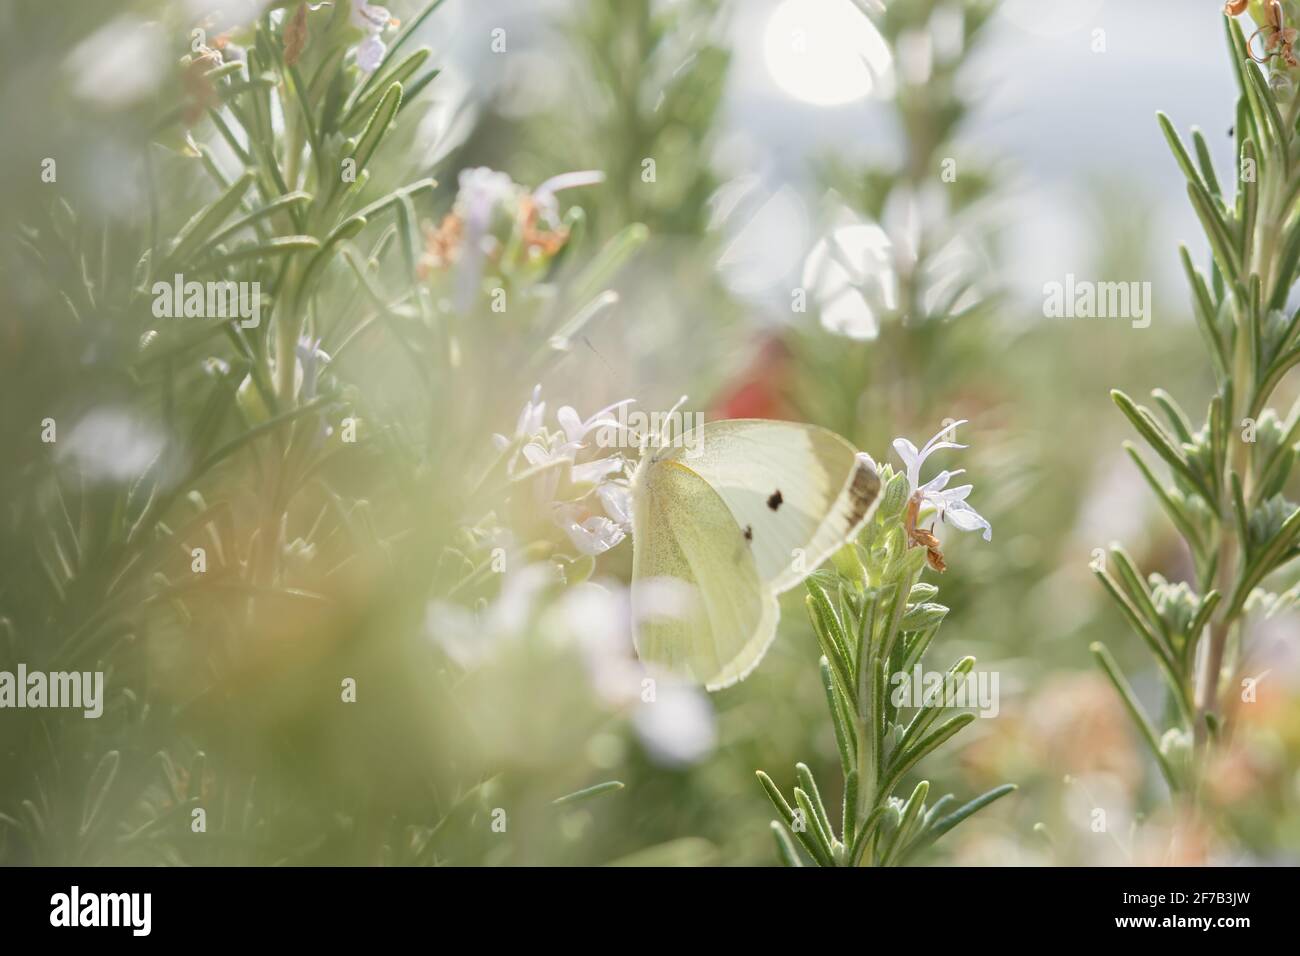 White cabbage butterfly on blue rosemary flowers. Day butterfly lat. Pieris brassicae feeds on nectar. Bright summer rays of the sun. Macro atmospheri Stock Photo